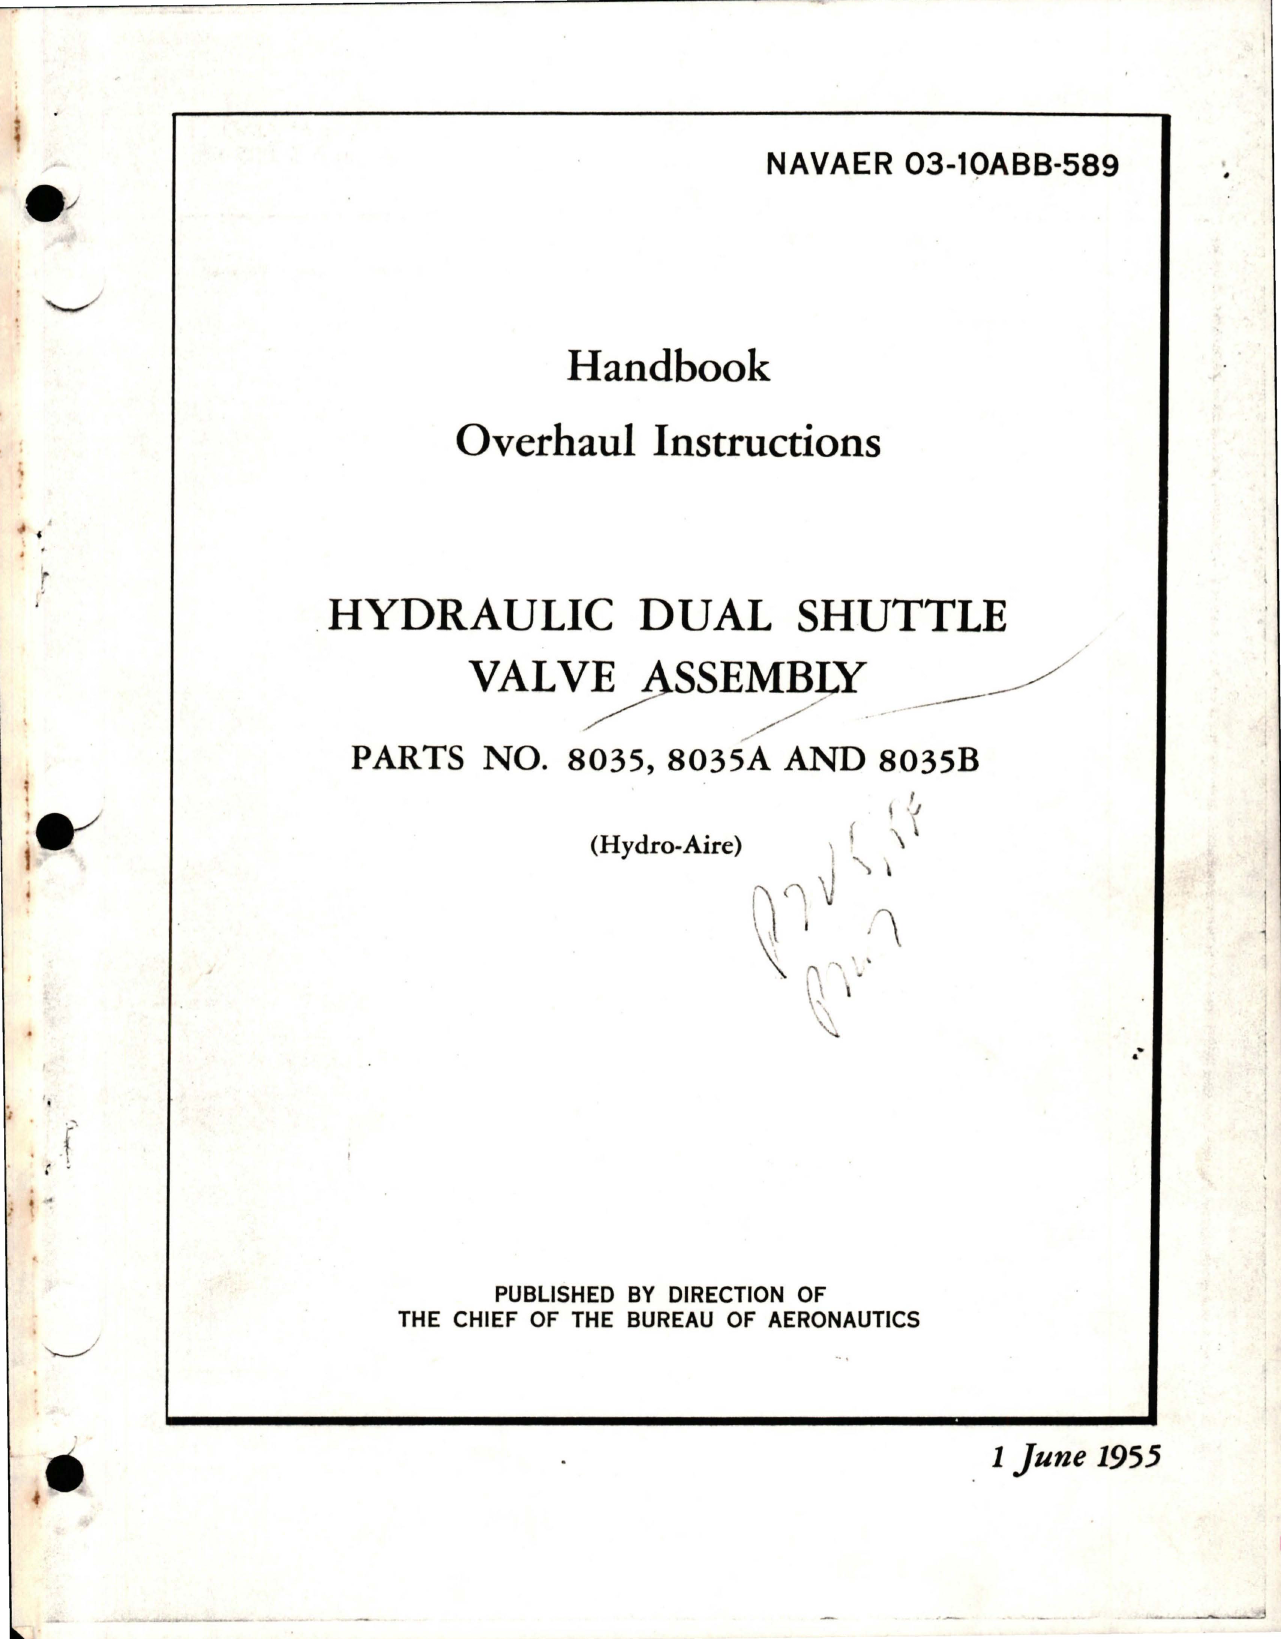 Sample page 1 from AirCorps Library document: Overhaul Instructions for Hydraulic Dual Shuttle Valve Assembly - Parts 8035, 8035A, 8035B